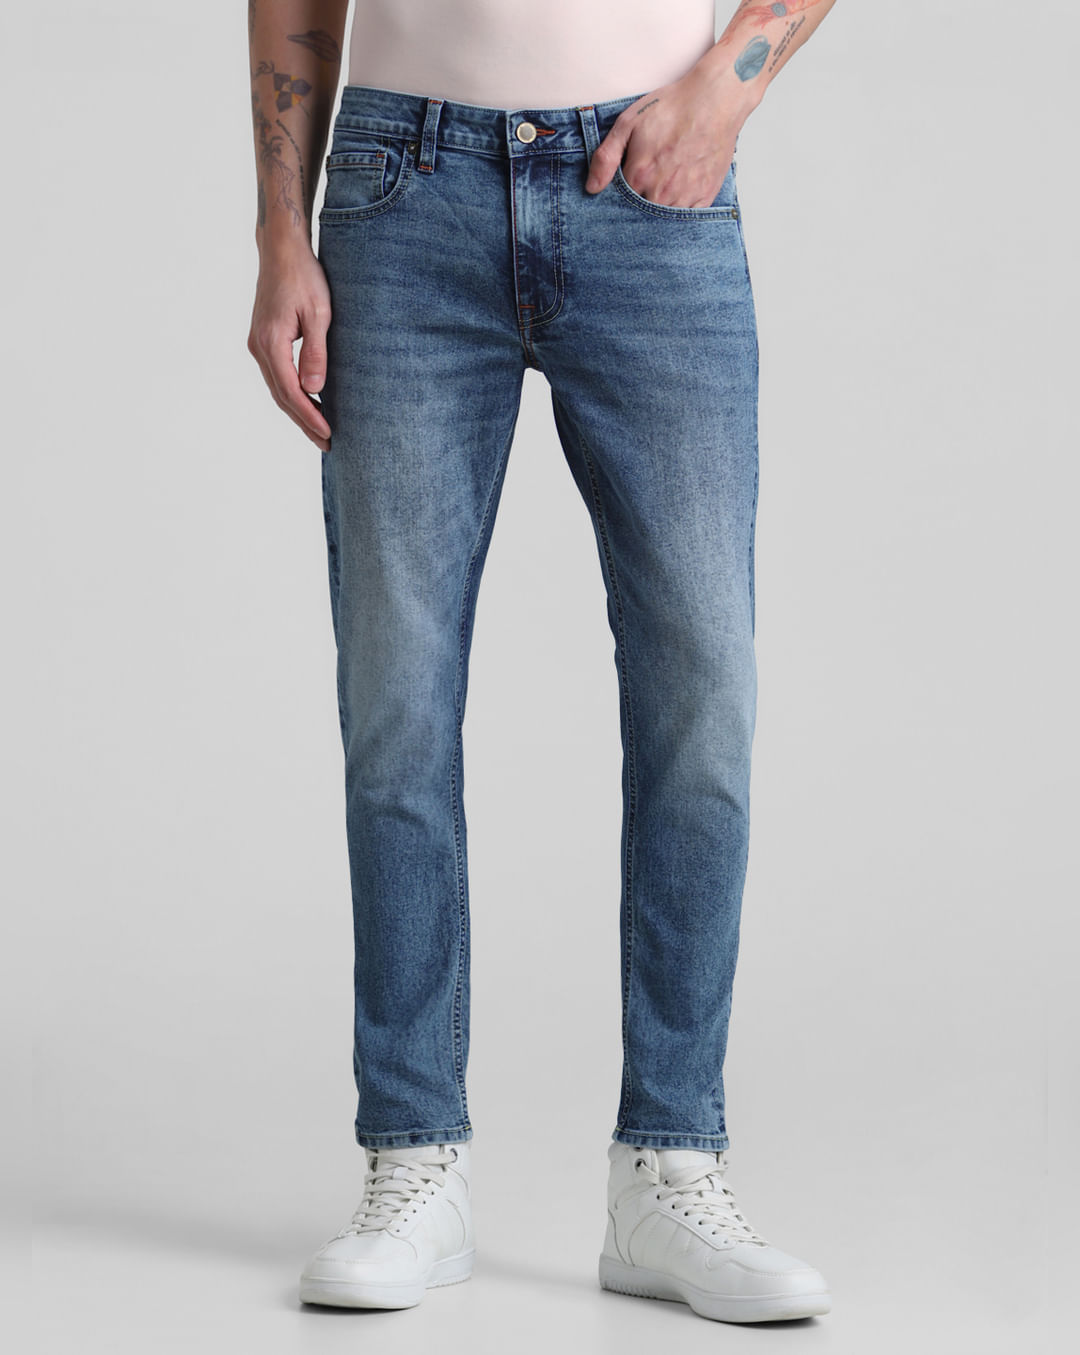 Don't Think Twice - DTT stretch slim fit jeans in mid blue